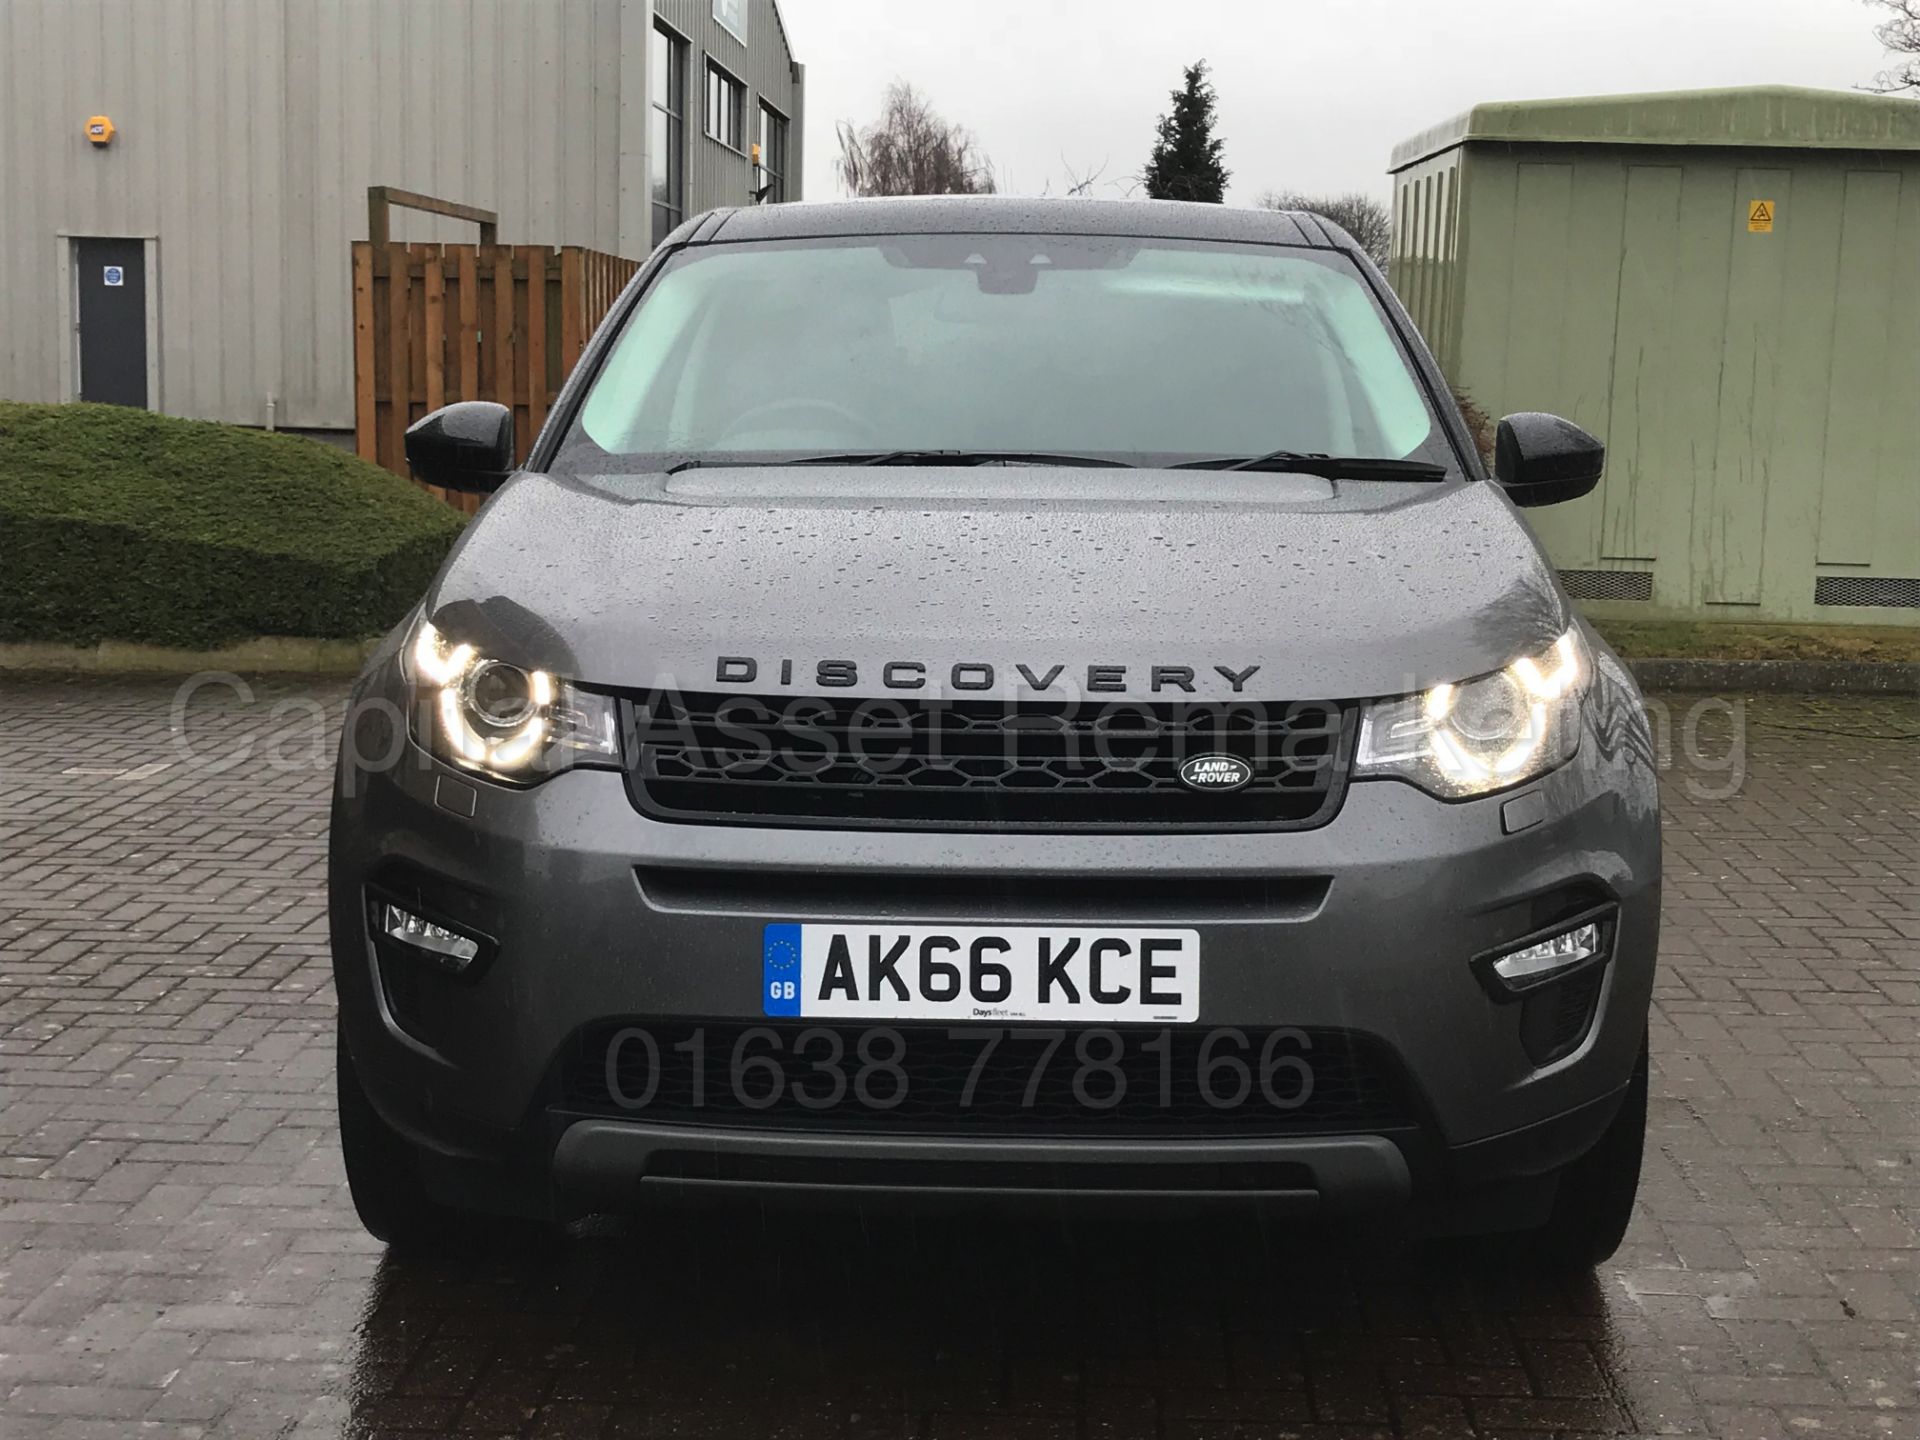 LAND ROVER DISCOVERY SPORT 'HSE - BLACK' (2017 MODEL) '2.0 TD4 - AUTO - 7 SEATER' *MASSIVE SPEC* - Image 13 of 53